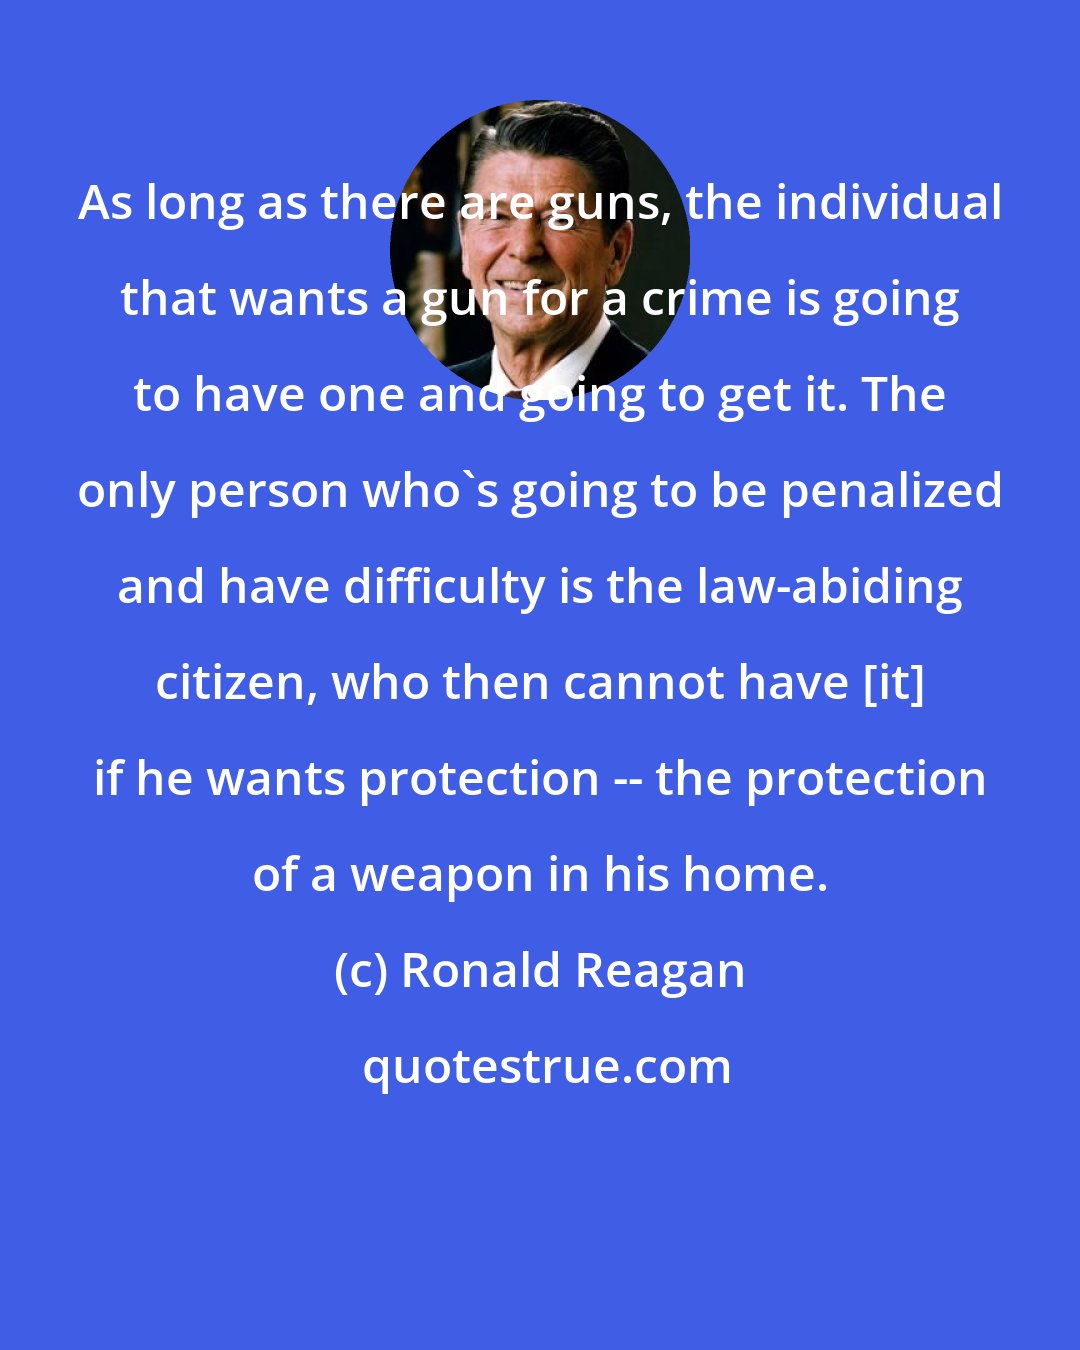 Ronald Reagan: As long as there are guns, the individual that wants a gun for a crime is going to have one and going to get it. The only person who's going to be penalized and have difficulty is the law-abiding citizen, who then cannot have [it] if he wants protection -- the protection of a weapon in his home.